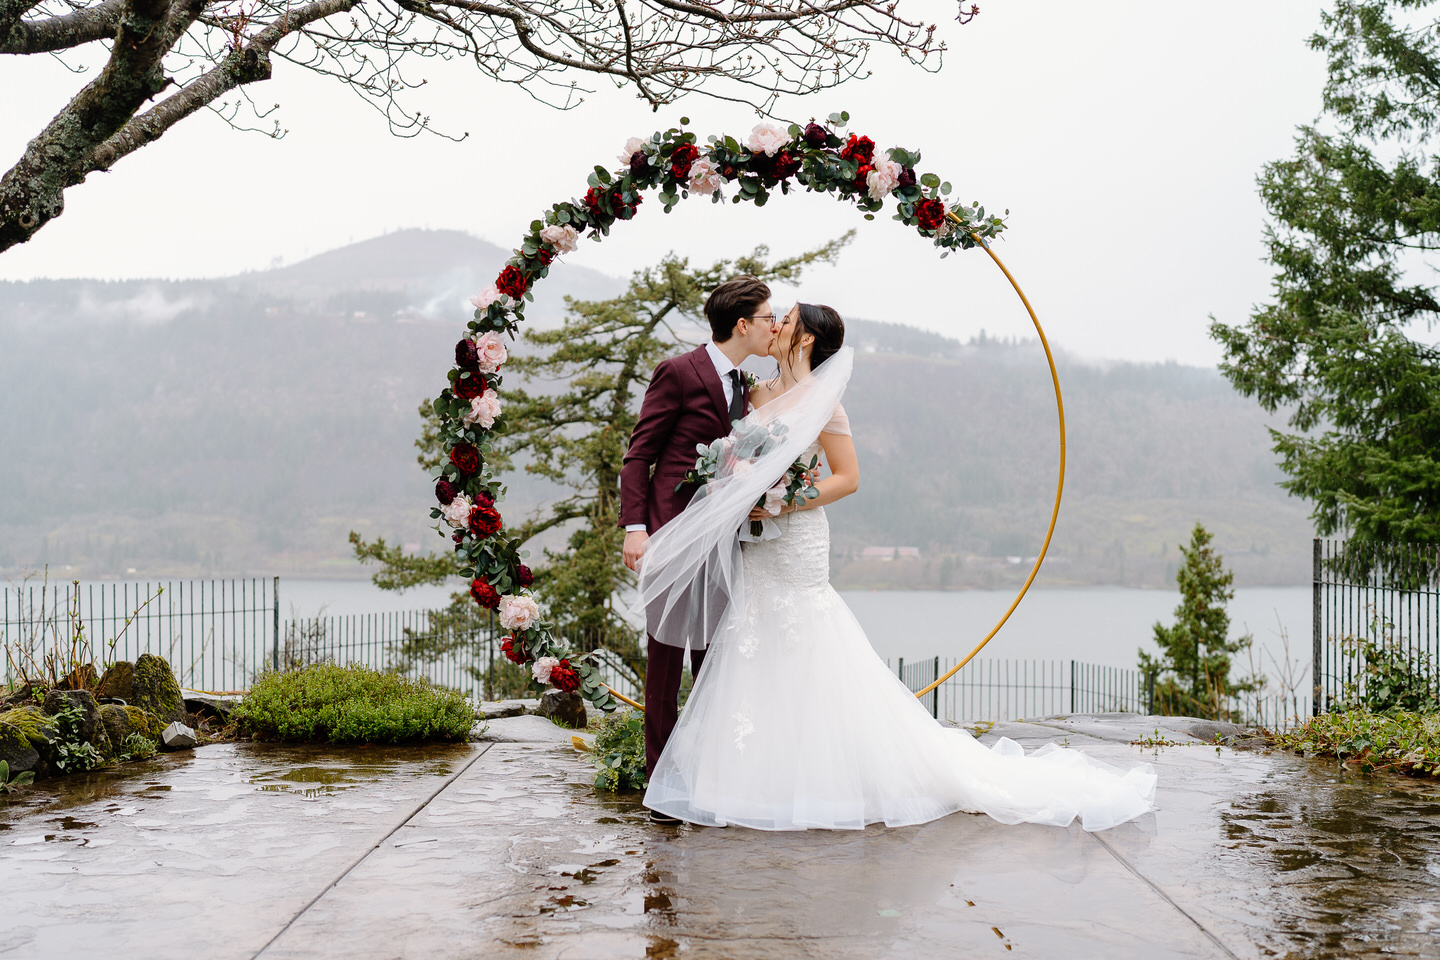 rainy spring wedding in hood river oregon with hoop floral background